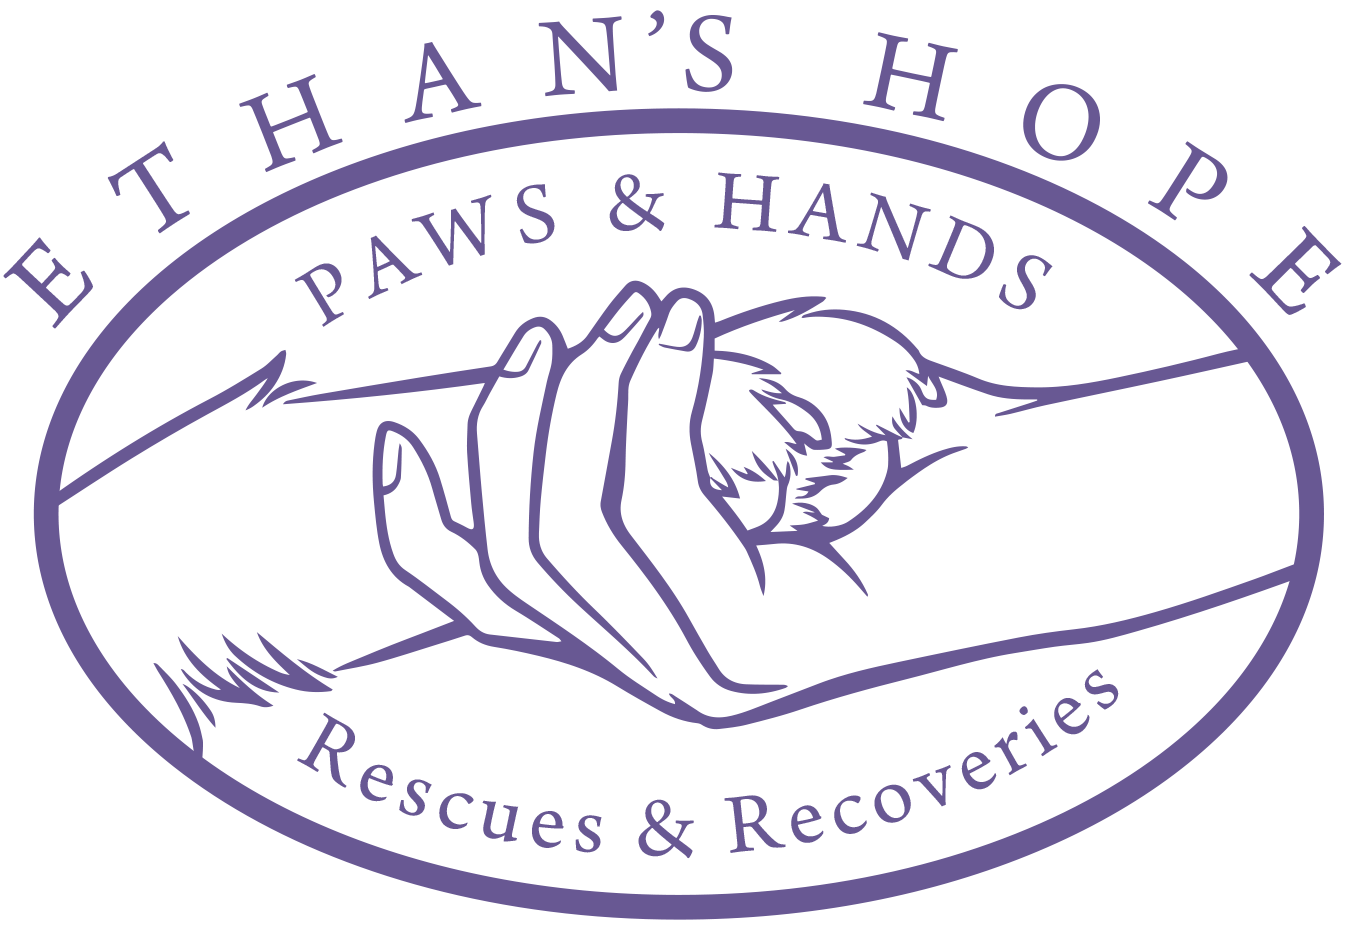 ethans-hope-paws-and-hands-purple